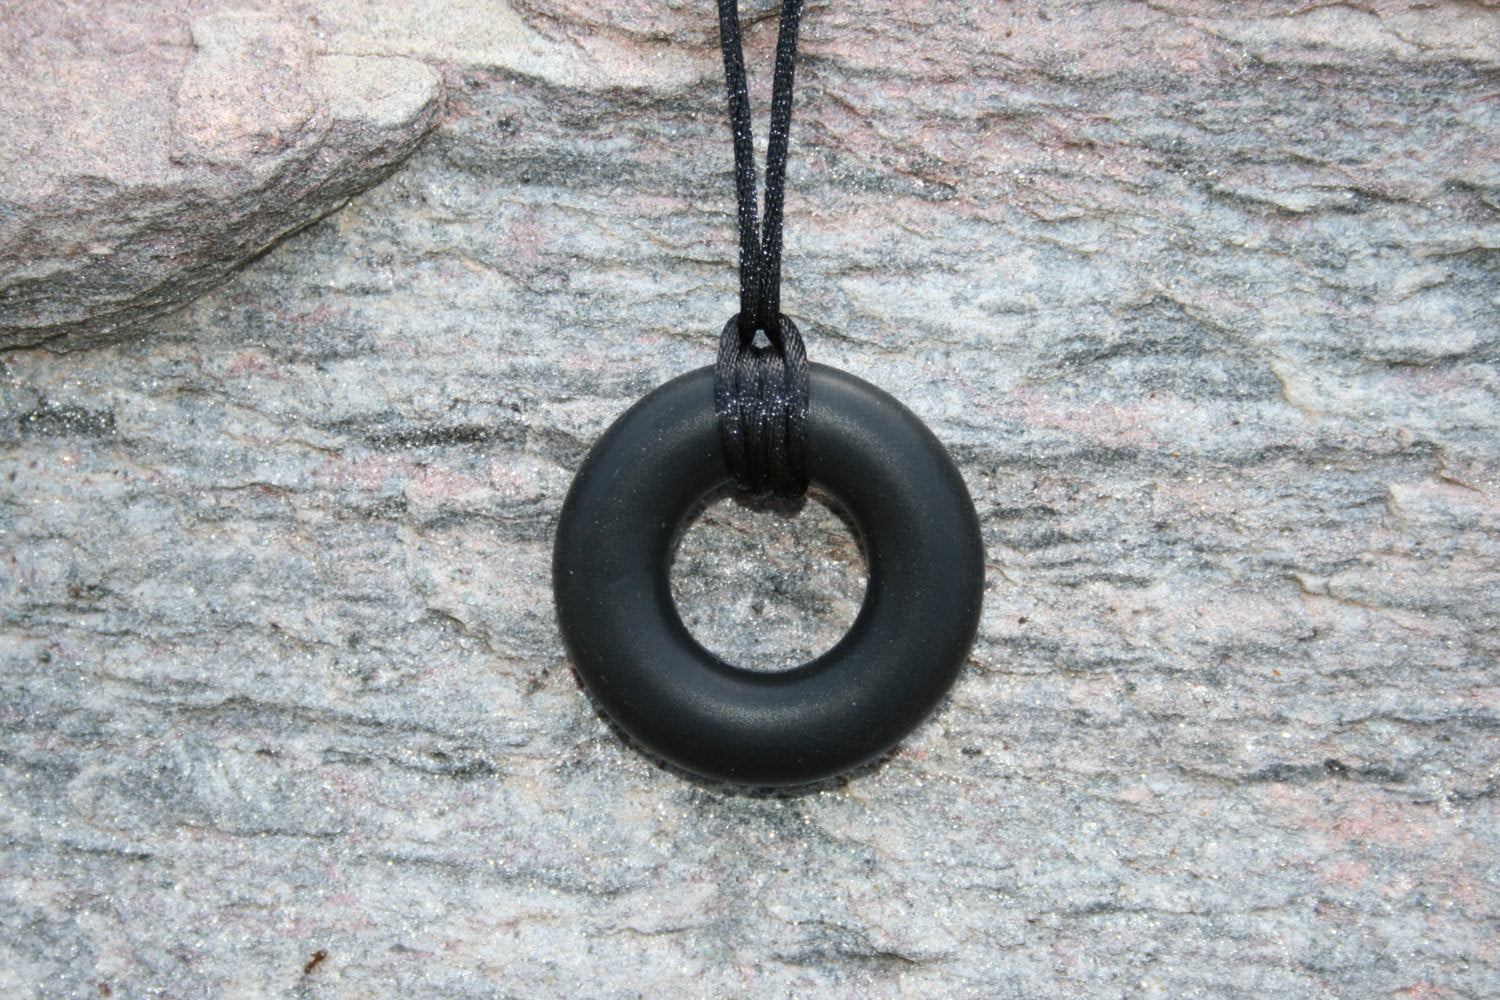 Pictured is black sensory Necklace for Children with Chewable Circle Pendant - available in 3 colors: black, turquoise, and navy blue! Measures Approximately 18" - This pendant and is made from food-grade silicone, strung on a nylon cord, and finished off with a plastic clasp designed to pop open when pulled really hard. (Jewelry on rock background)  